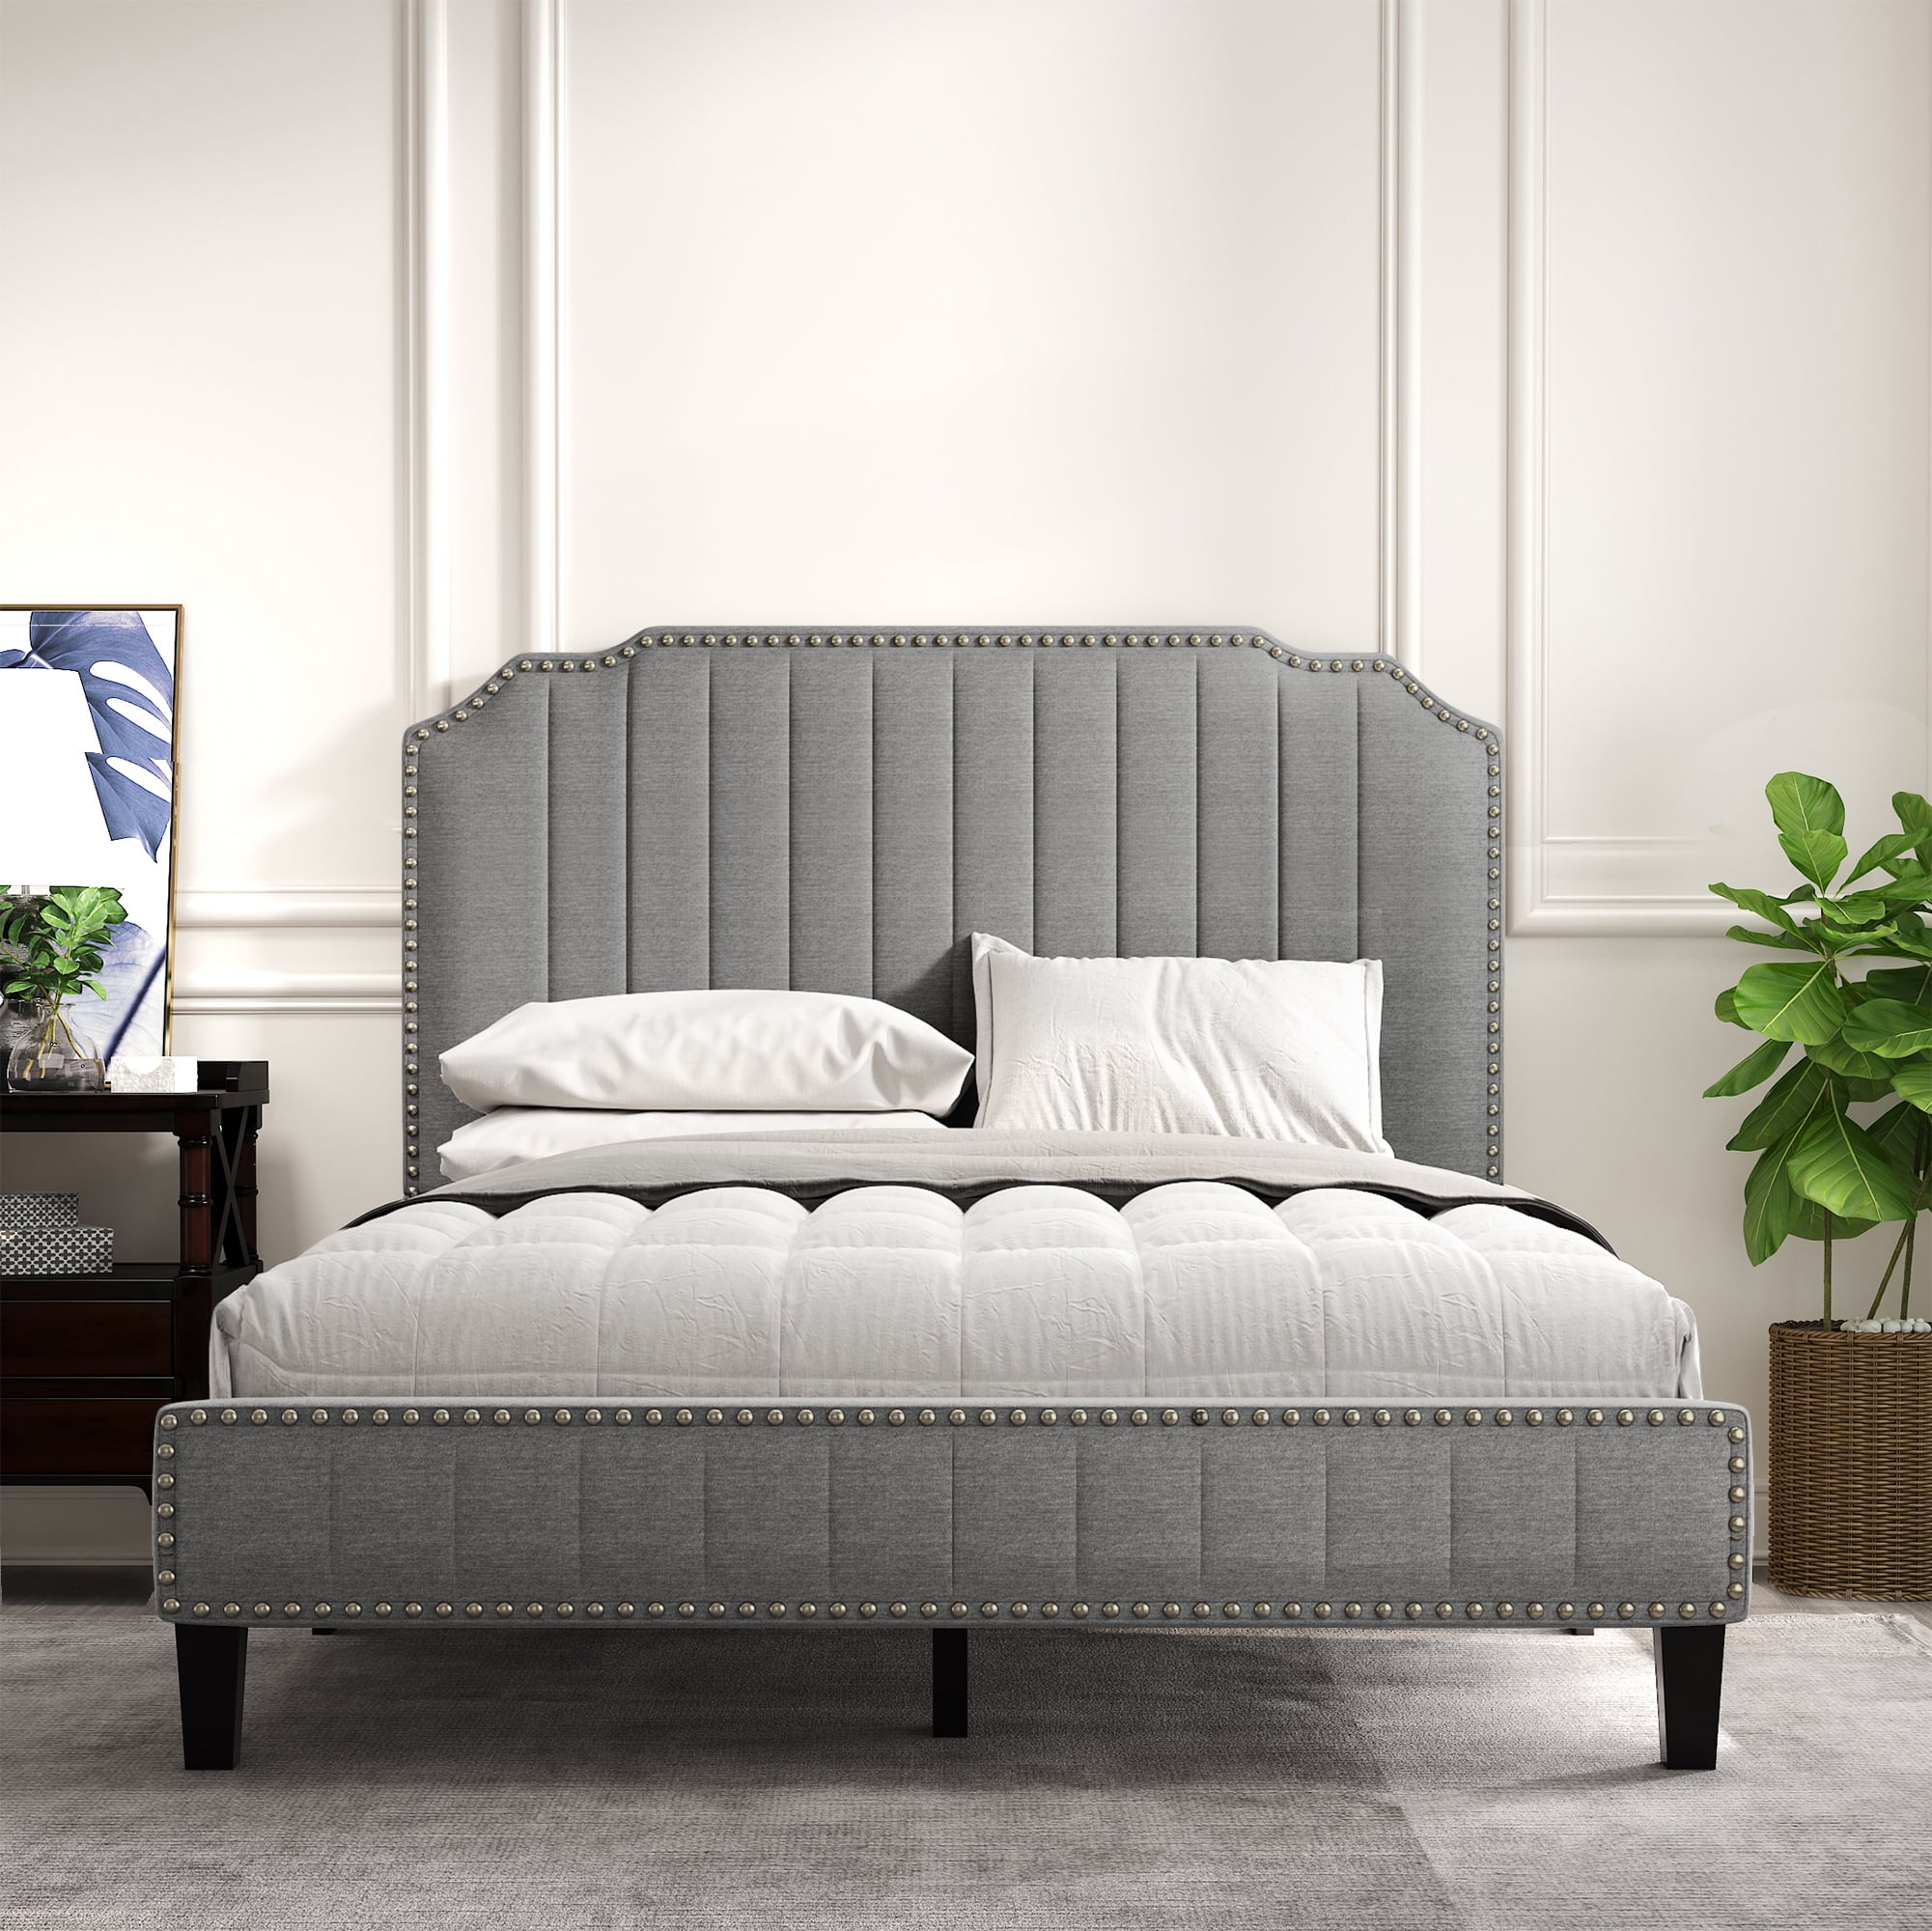 Platform Upholstered Gray Bed With Nailhead Frame Headboard King Queen Full Twin 